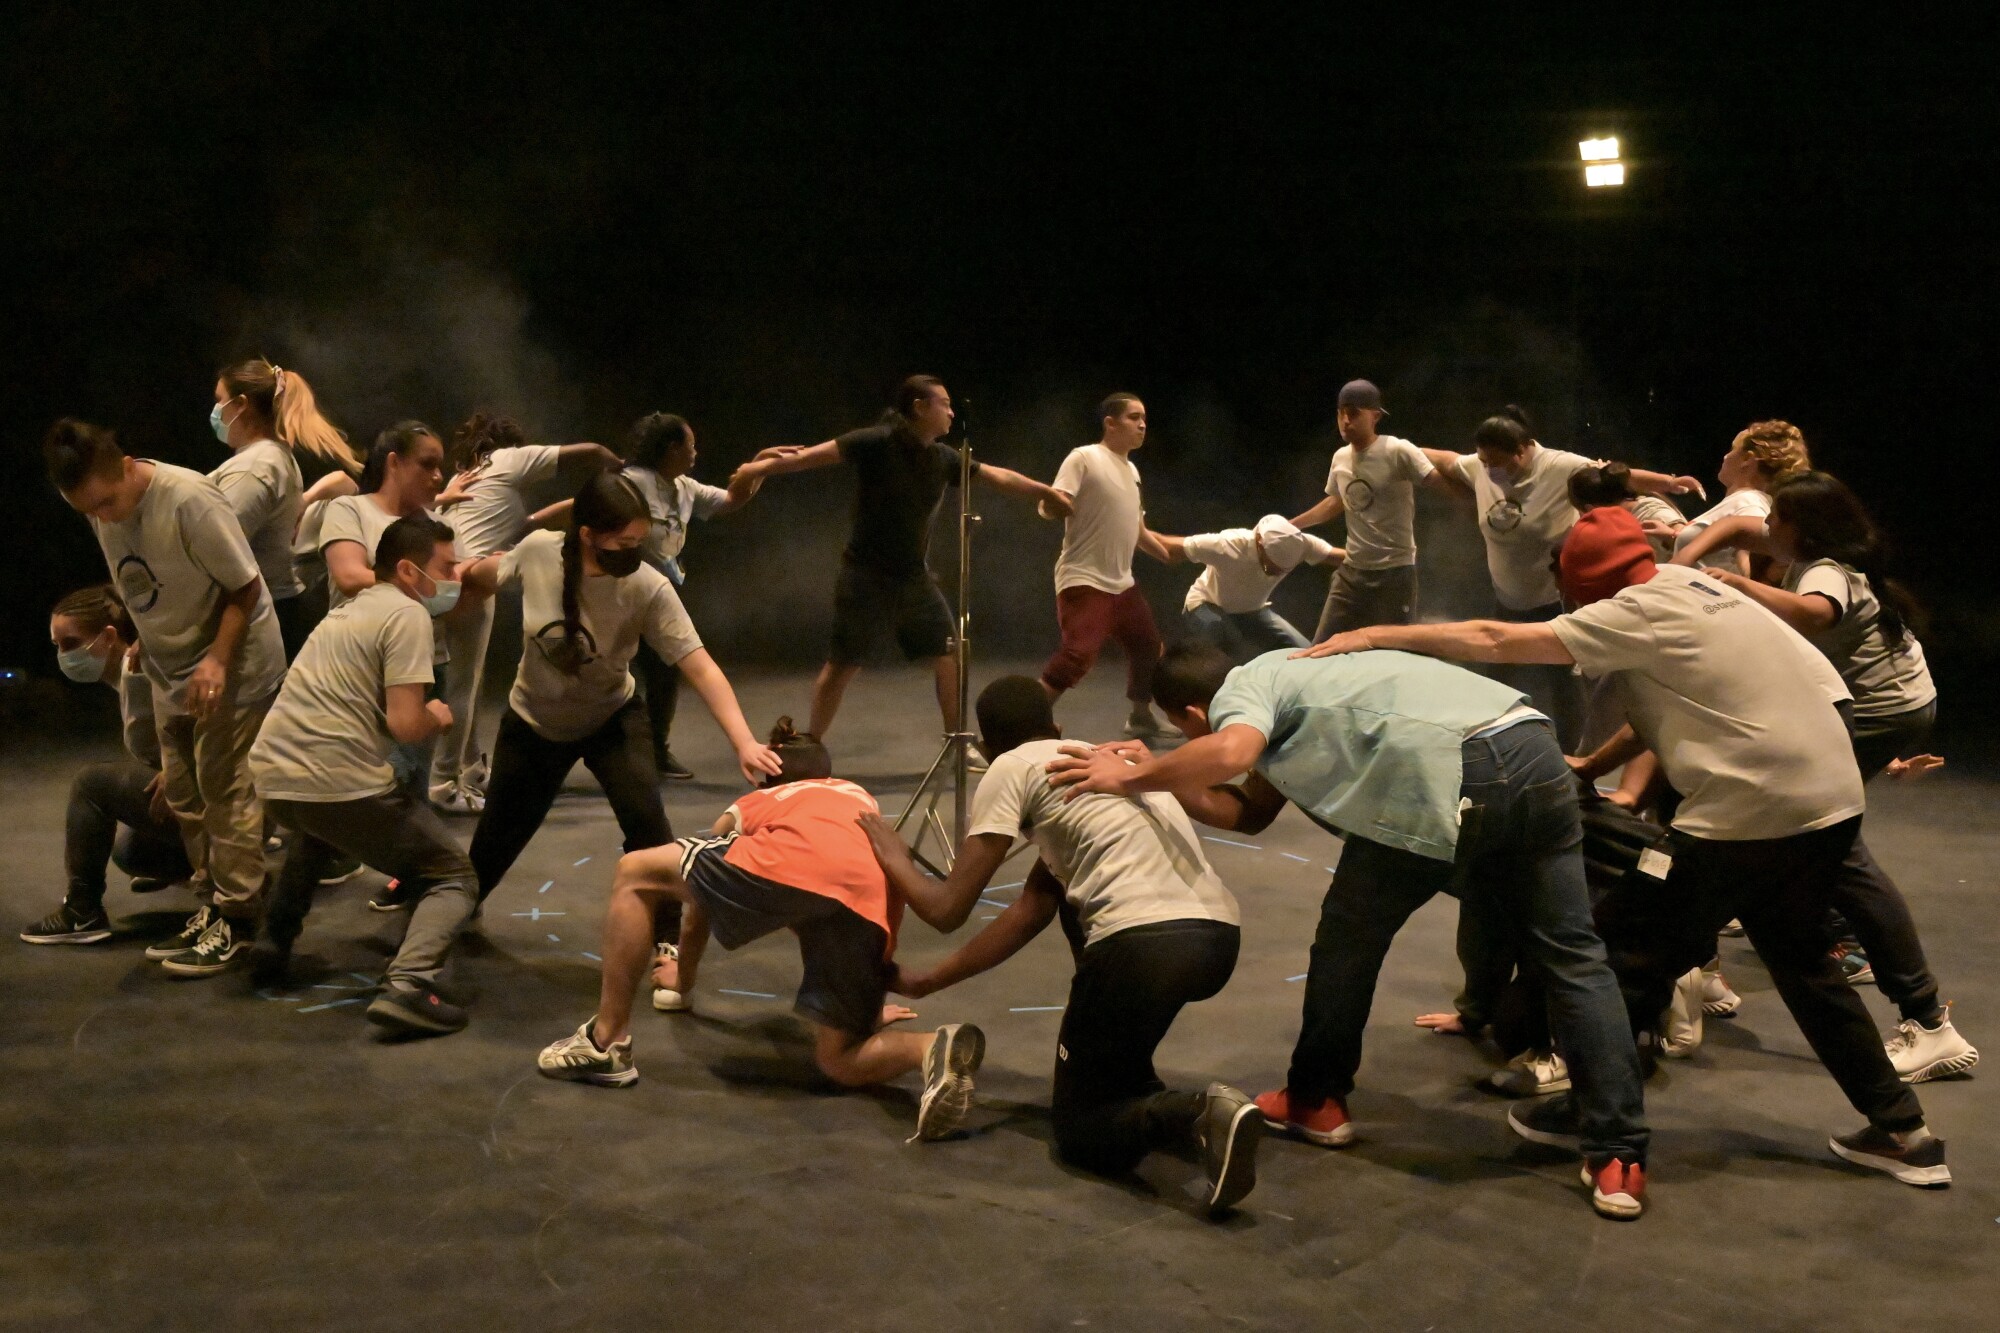 The cast of "Stay in Mexico" come together to form a root during a rehearsal of the dance sequence from the new opera.